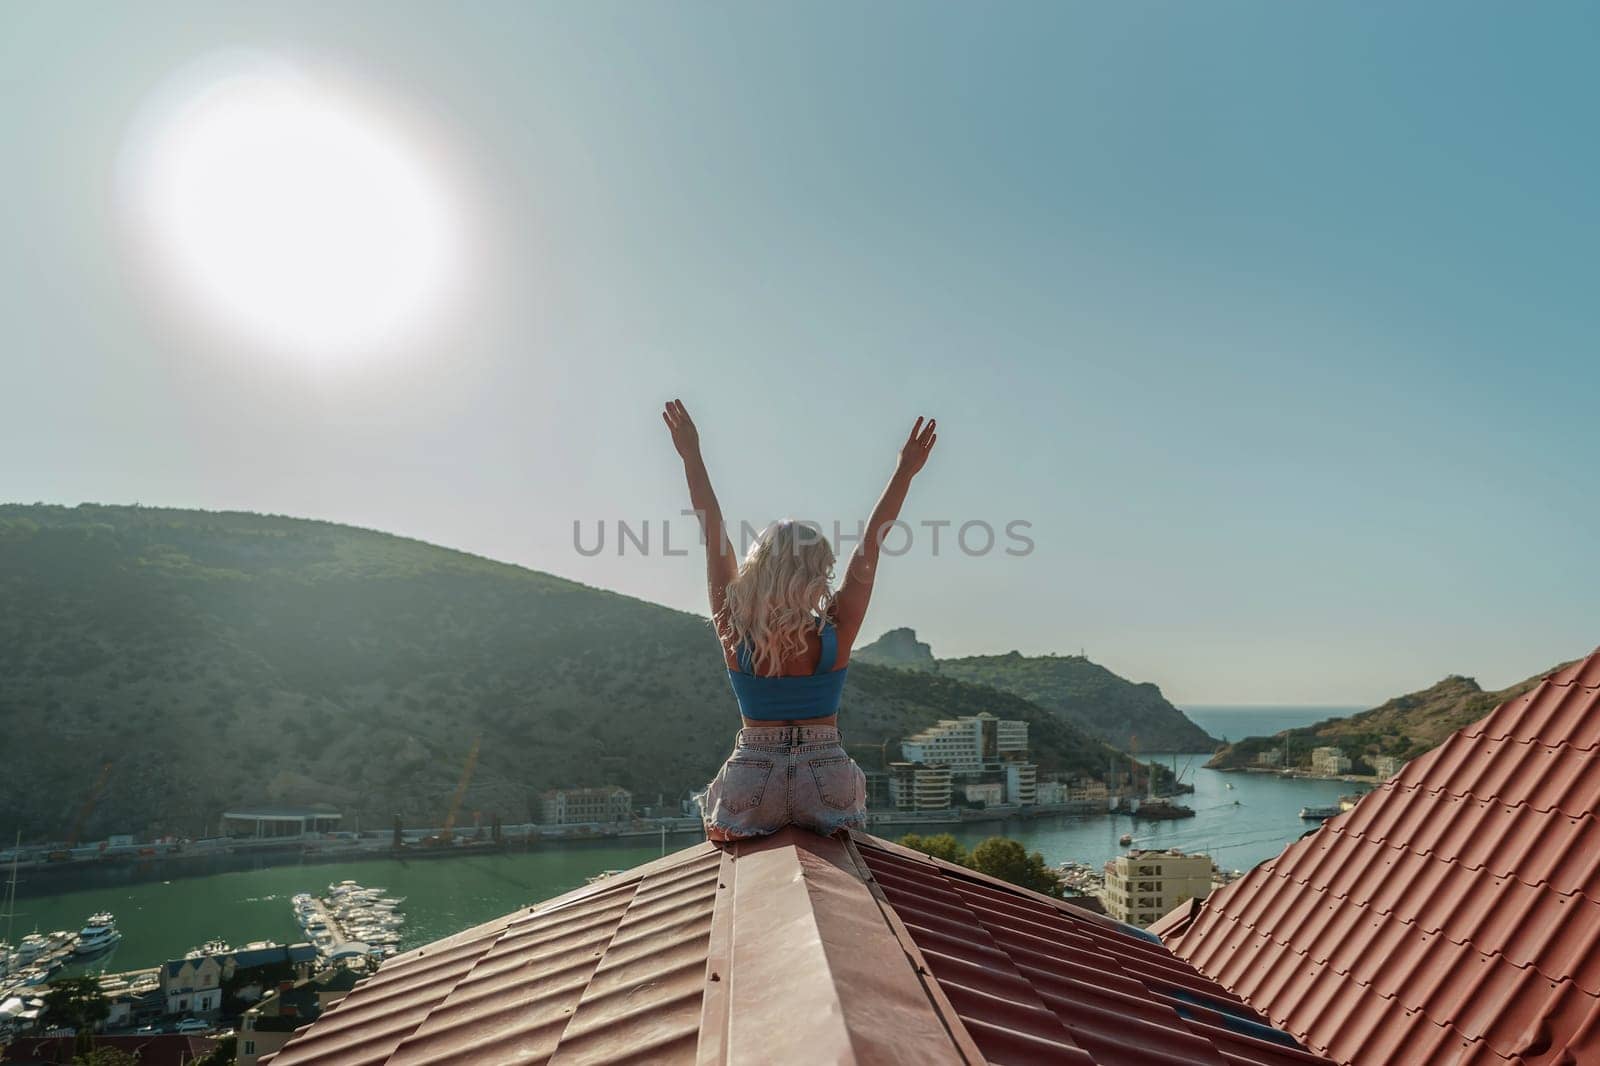 Woman sits on rooftop with outstretched arms, enjoys town view and sea mountains. Peaceful rooftop relaxation. Below her, there is a town with several boats visible in the water.